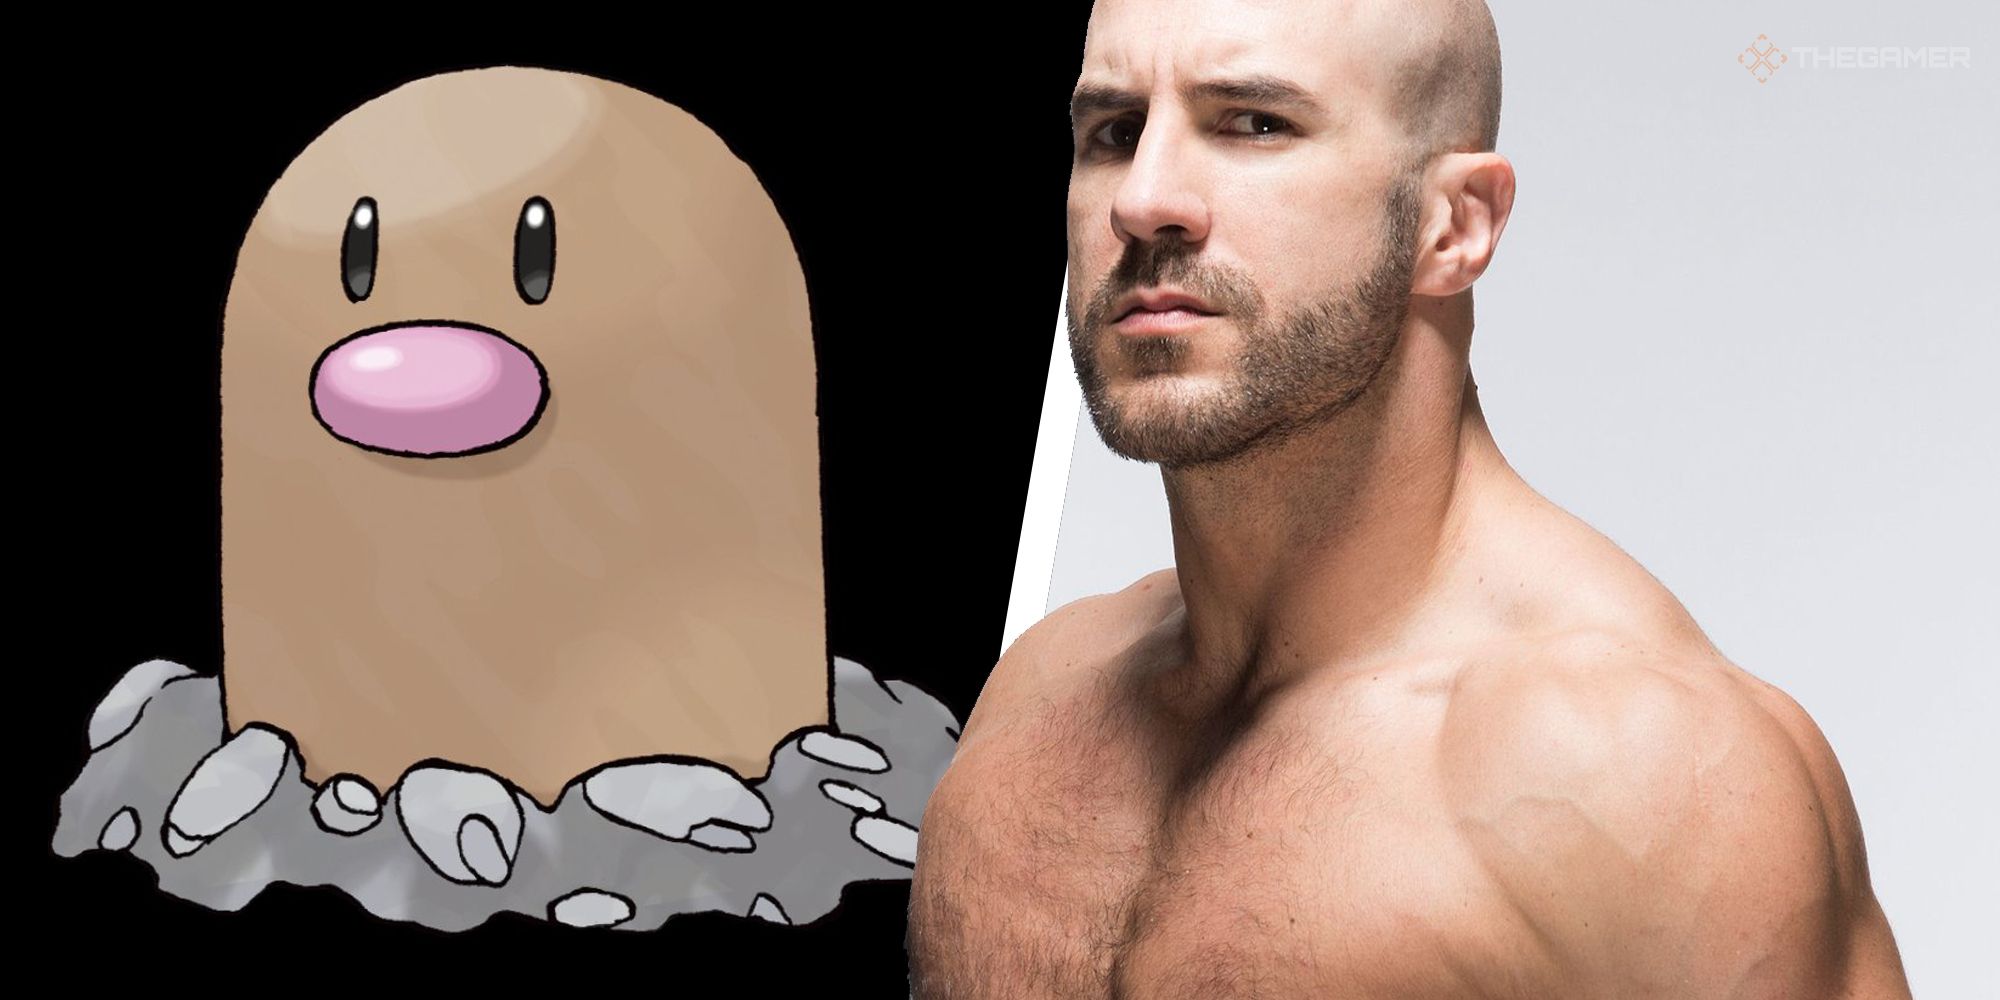 Heres 30 Wrestlers As Pokemon For The Royal Rumble (6)